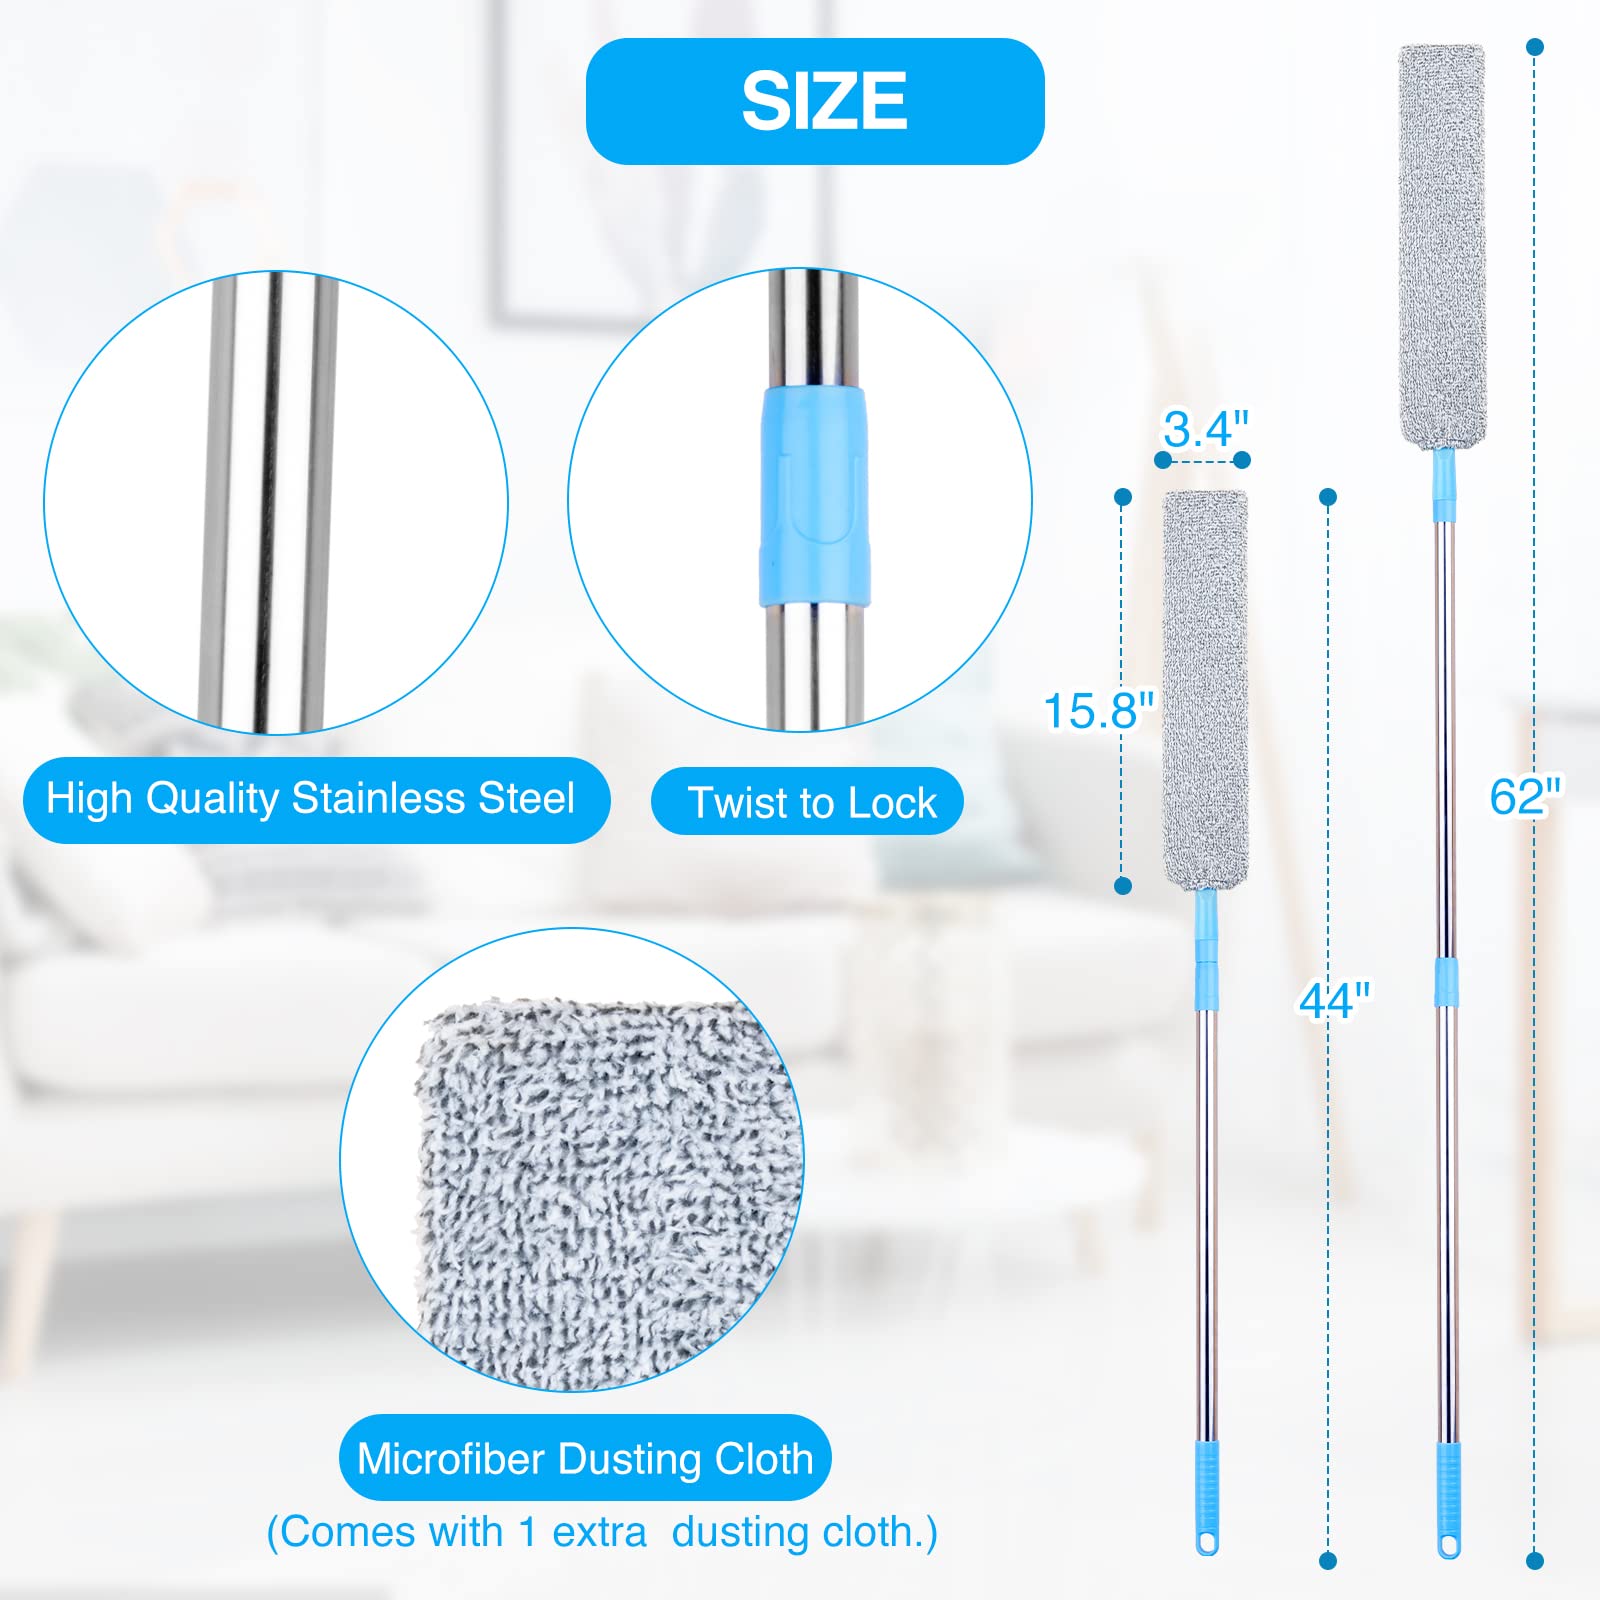 Retractable Clearance Dust Cleaner , Flexible Microfiber Duster for Crevices Under Furniture and Appliance, 44